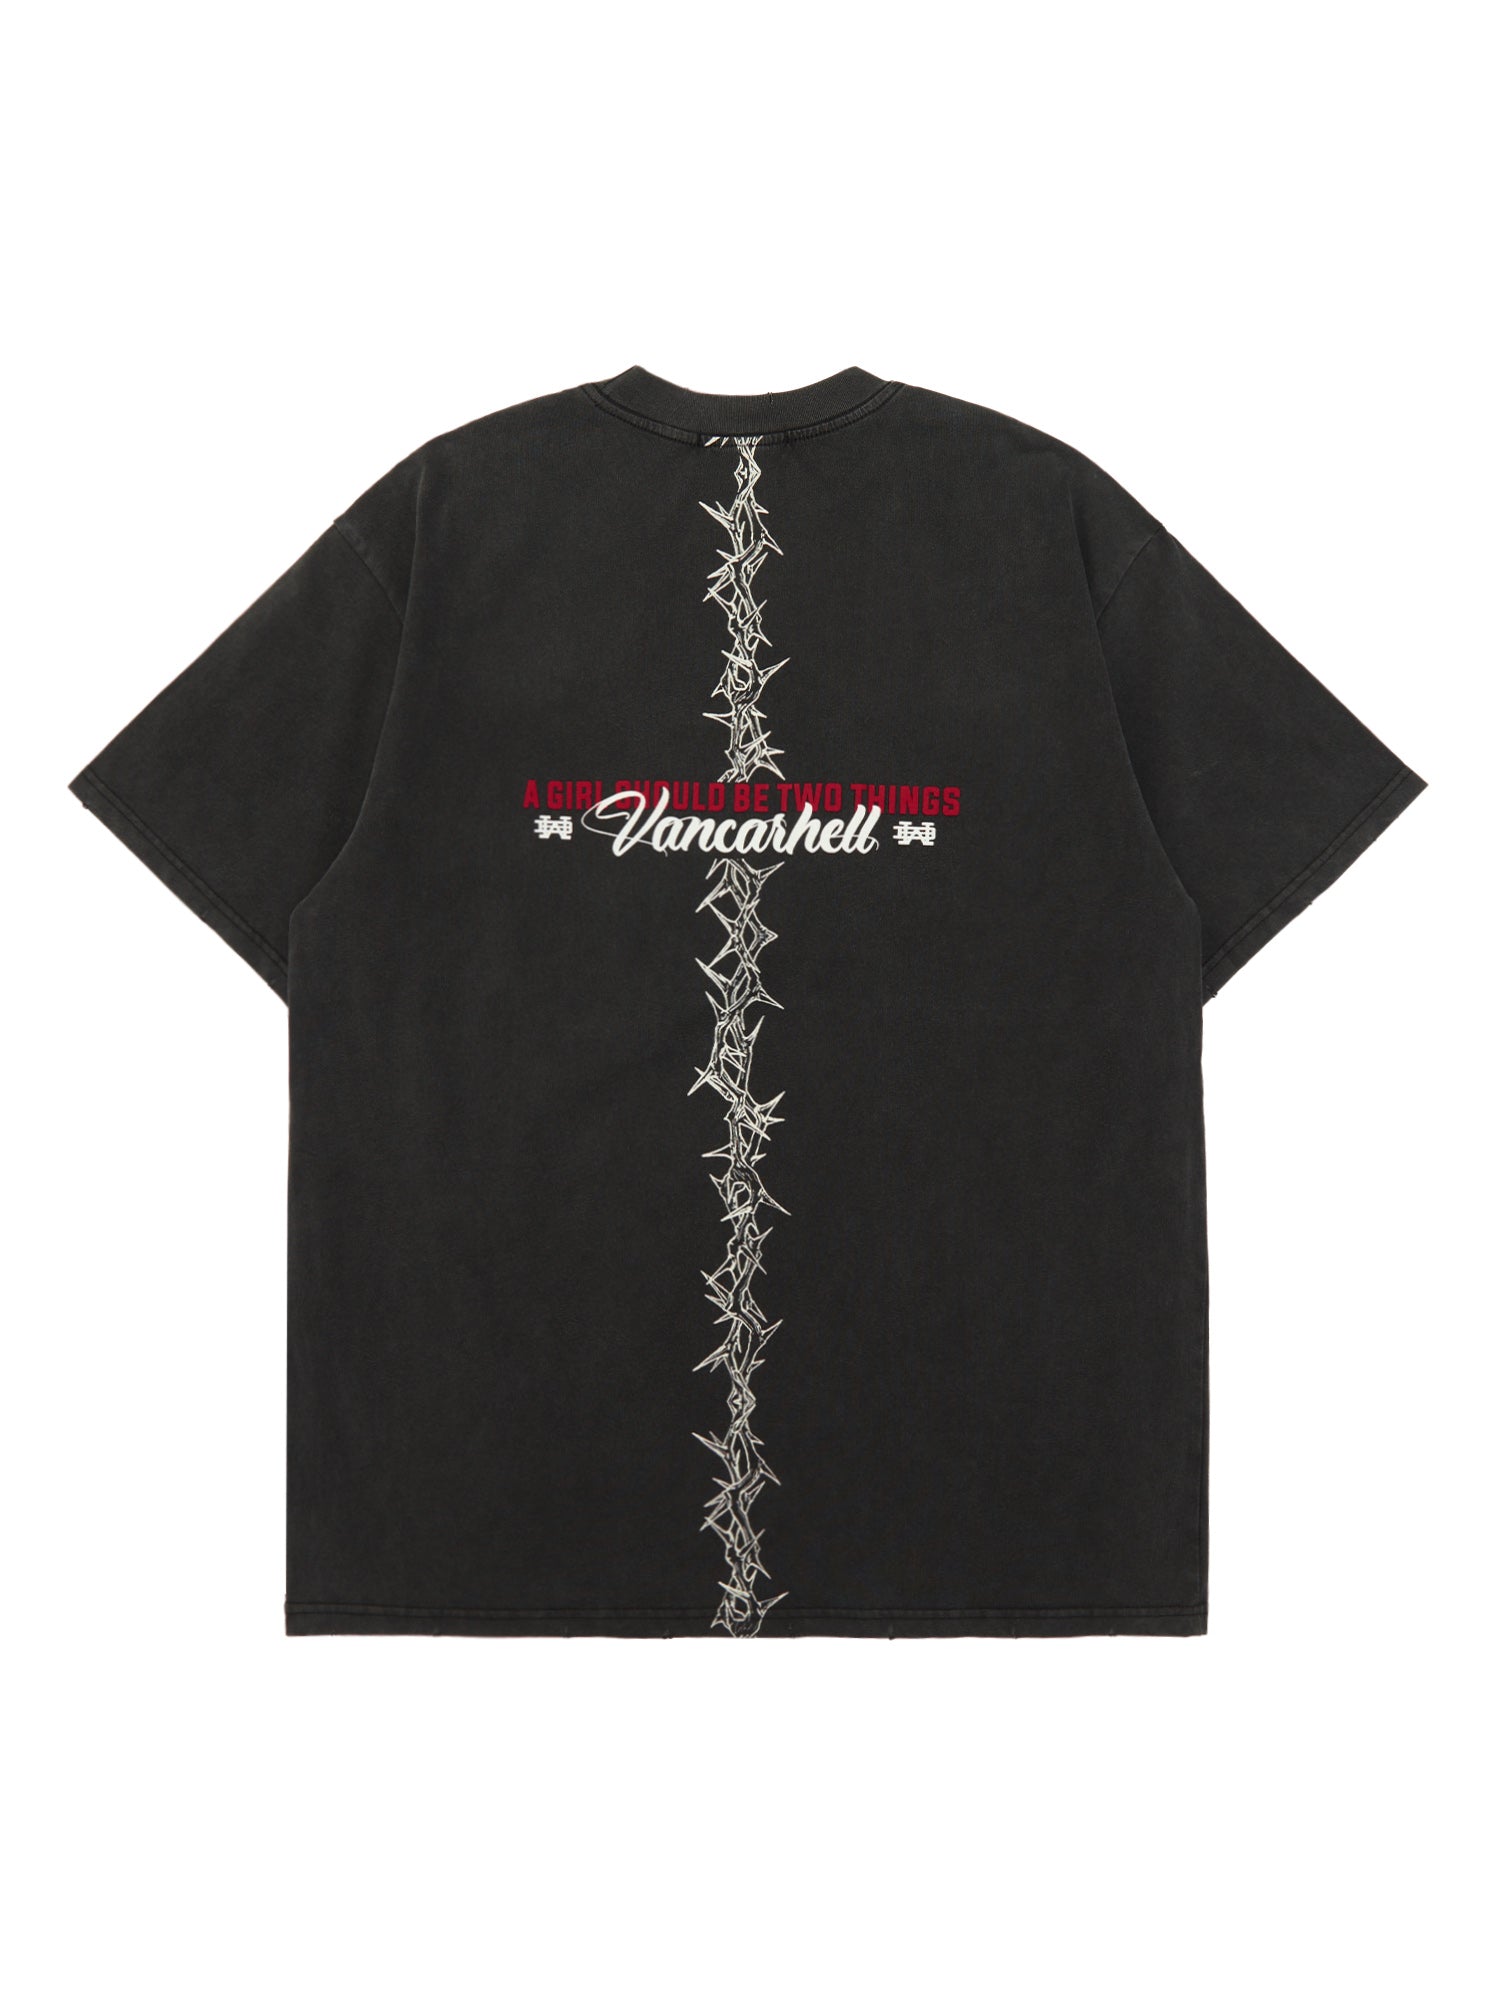 Thesupermade American Street Fashion Thorn Letter Print T-shirt